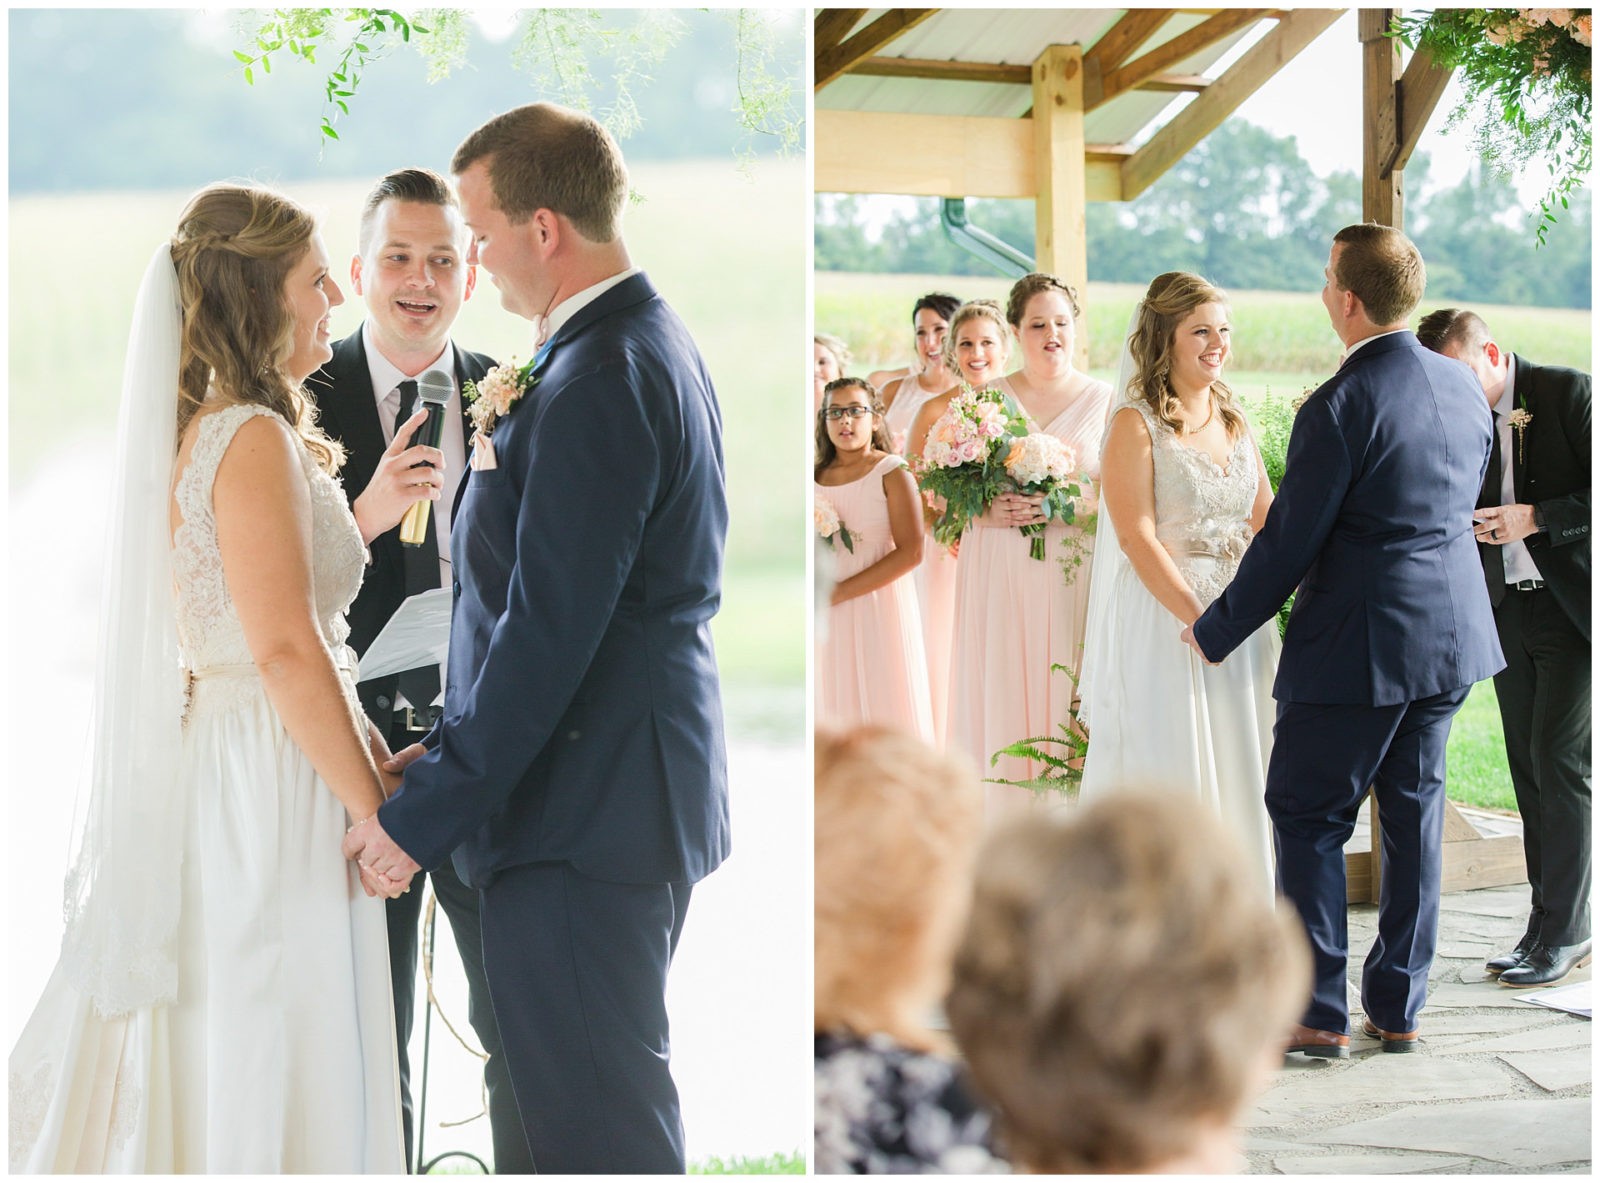 Wedding Ceremony Photos at the Barn at McCall Springs in Lawrenceburg, Kentucky.